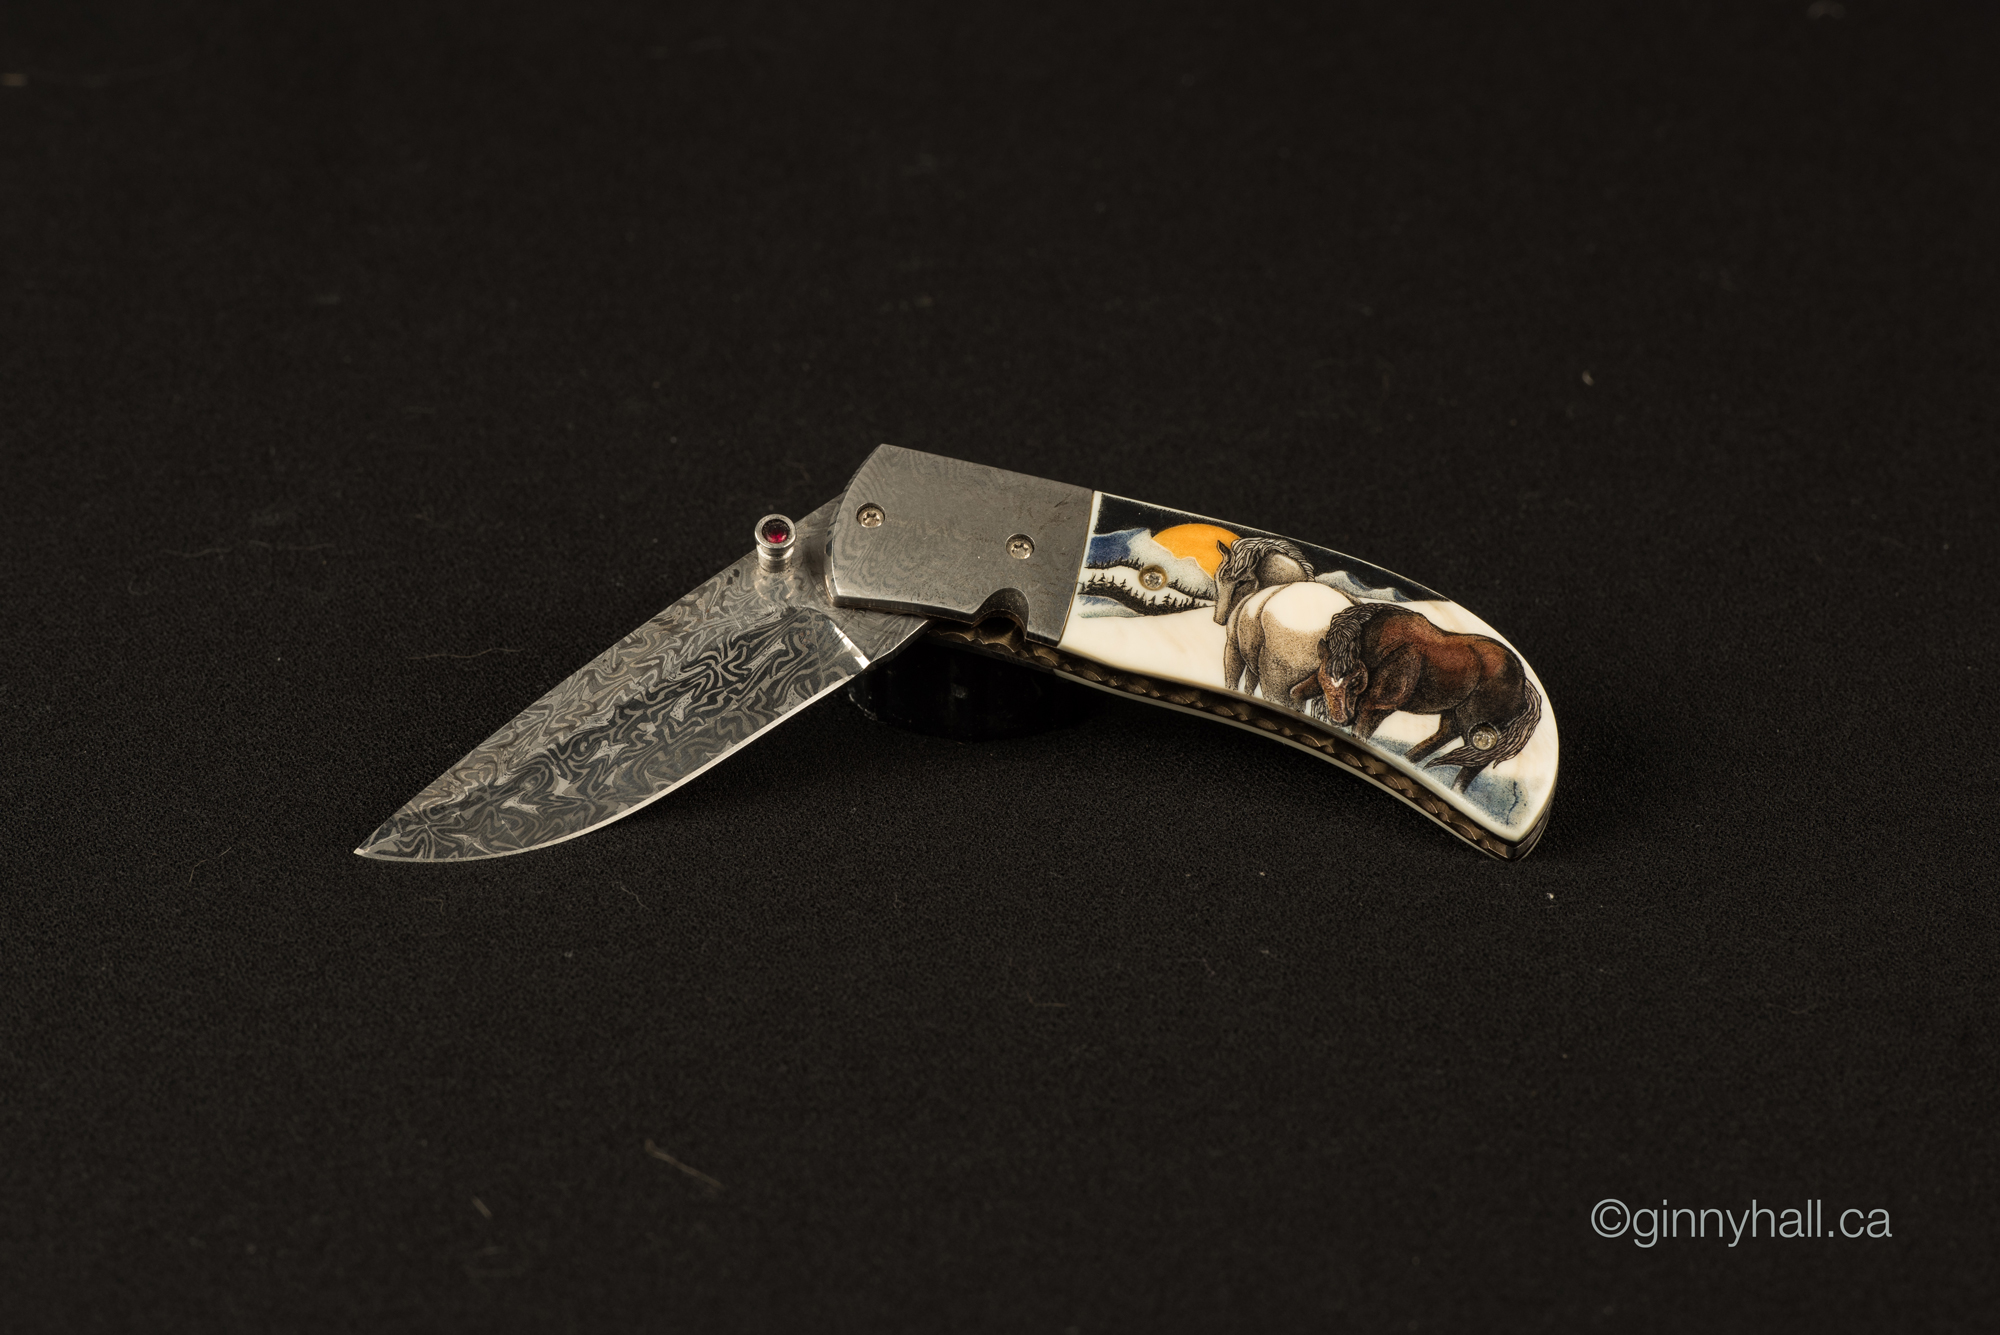 A scrimshaw peice by Ginny Hall showing a collaboration with Hatt Knives.